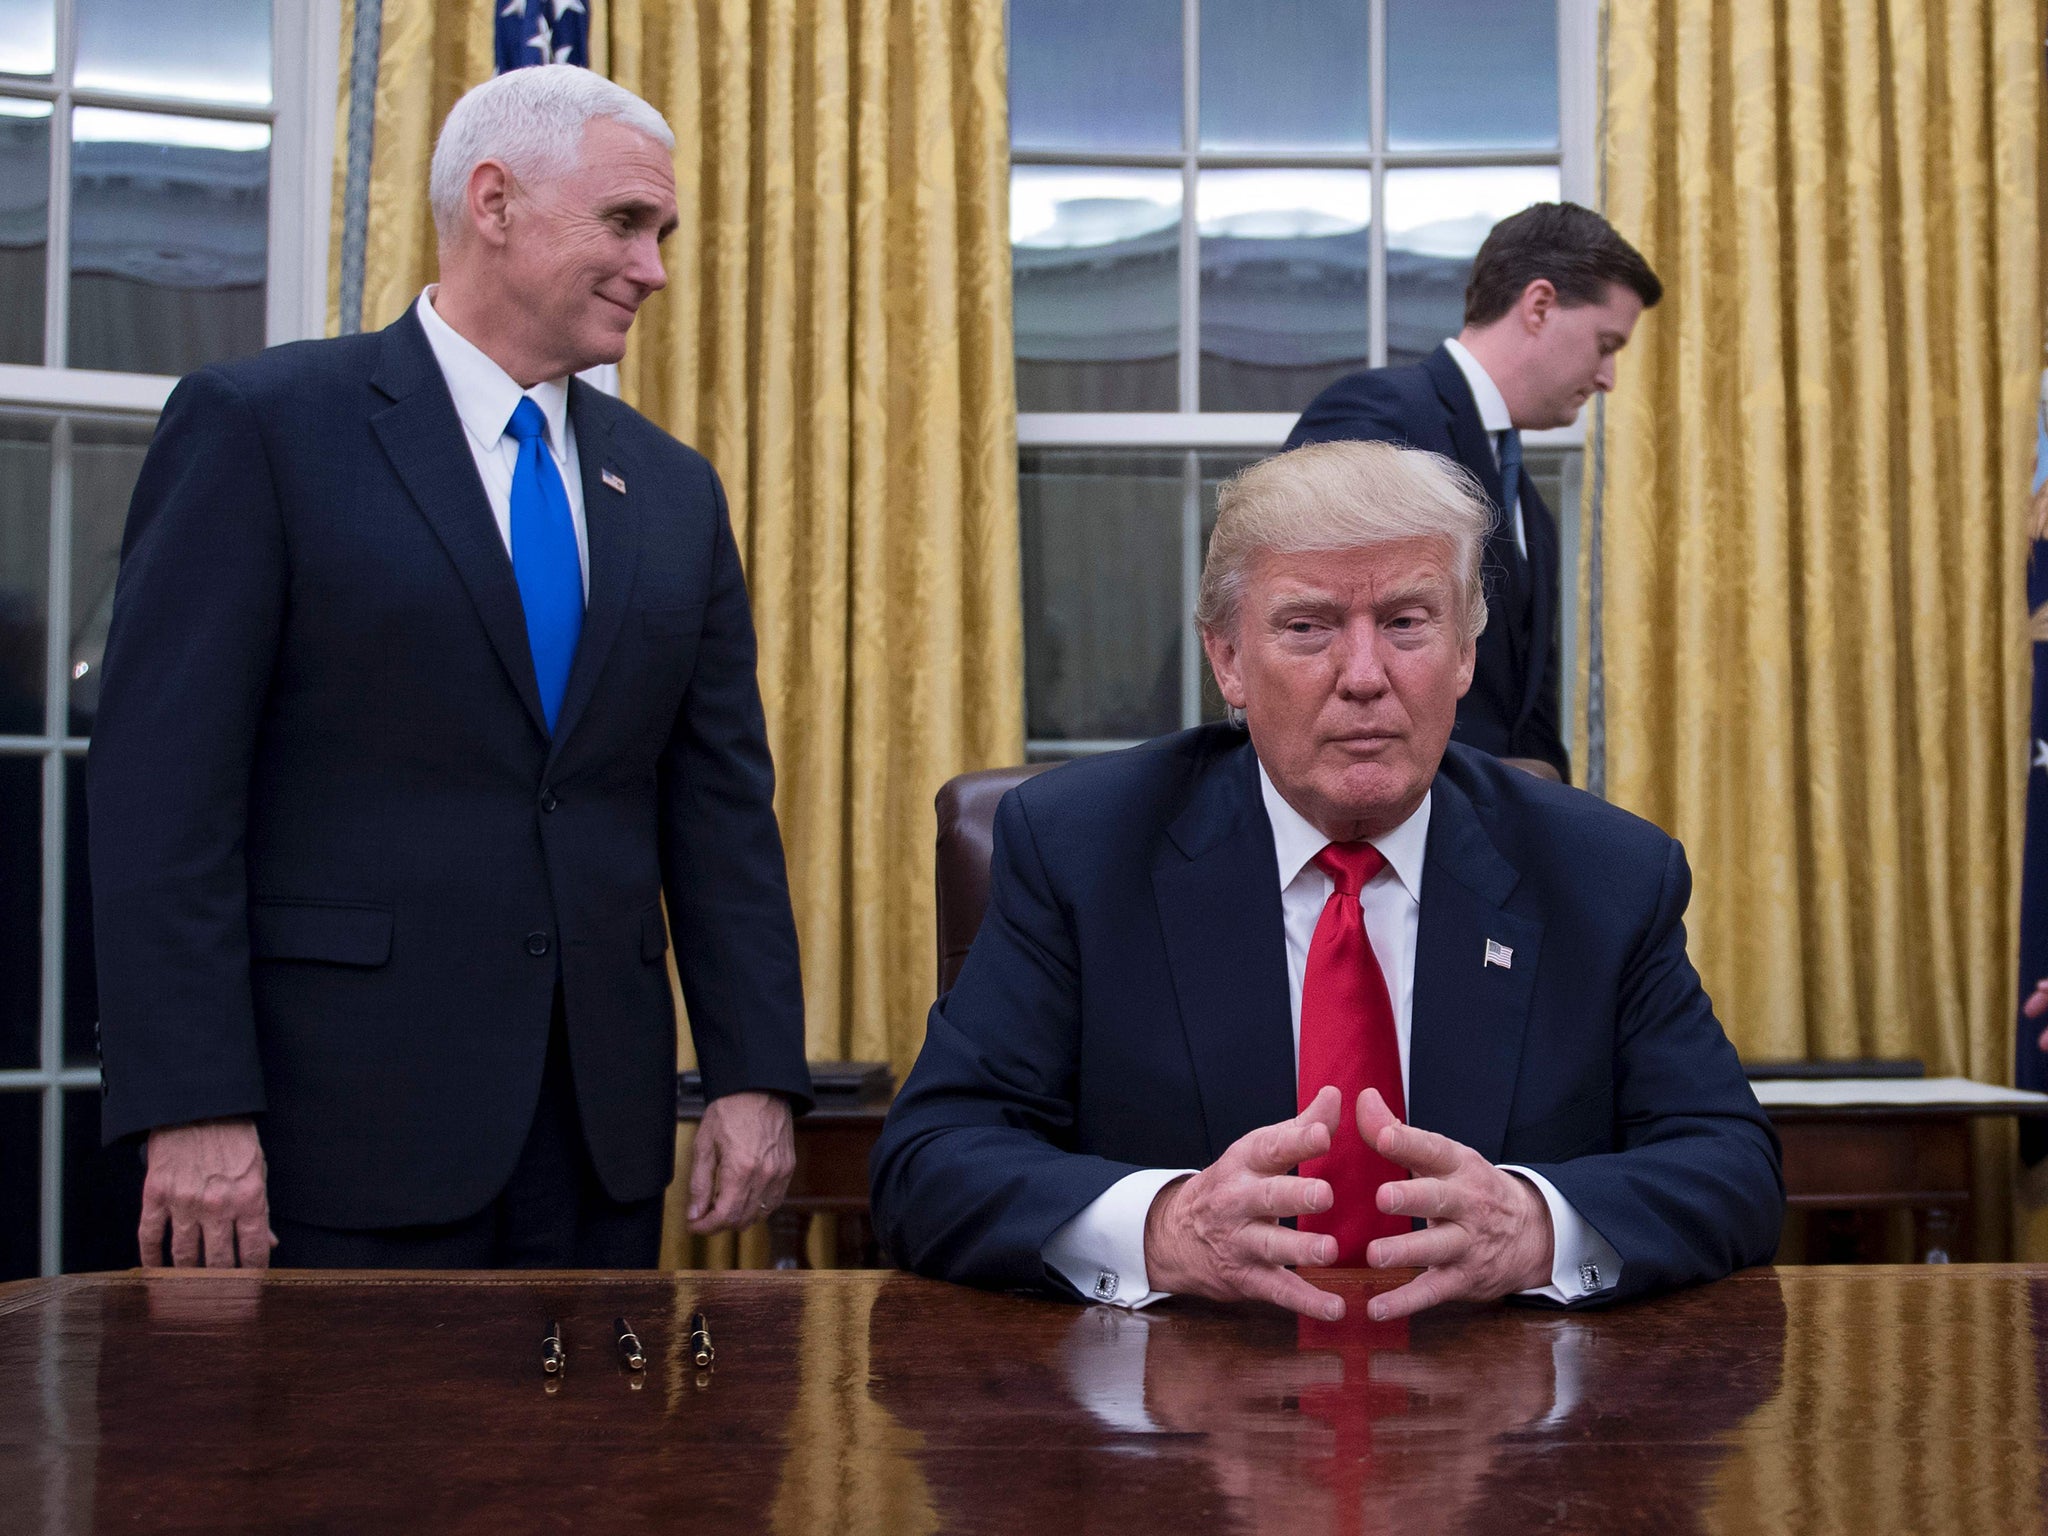 Donald Trump sits in the Oval Office for the first time, flanked by his Vice President Mike Pence and White House Chief of Staff Reince Priebus